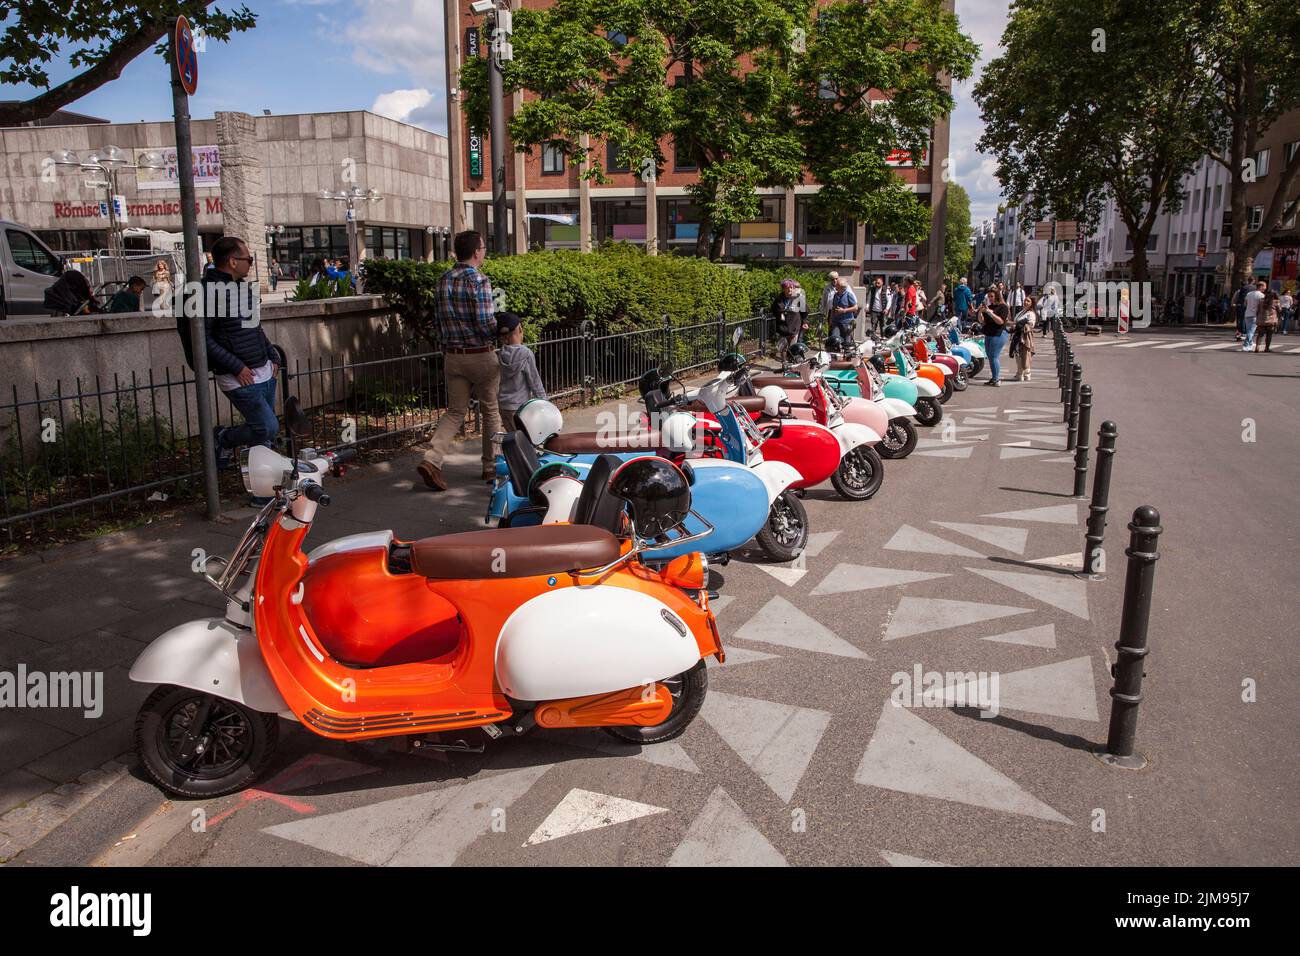 E-Vespina scooters with sidecars are available for rent for city tours near the cathedral, Cologne, Germany. E-Vespina Roller mit Seitenwagen stehen z Stock Photo